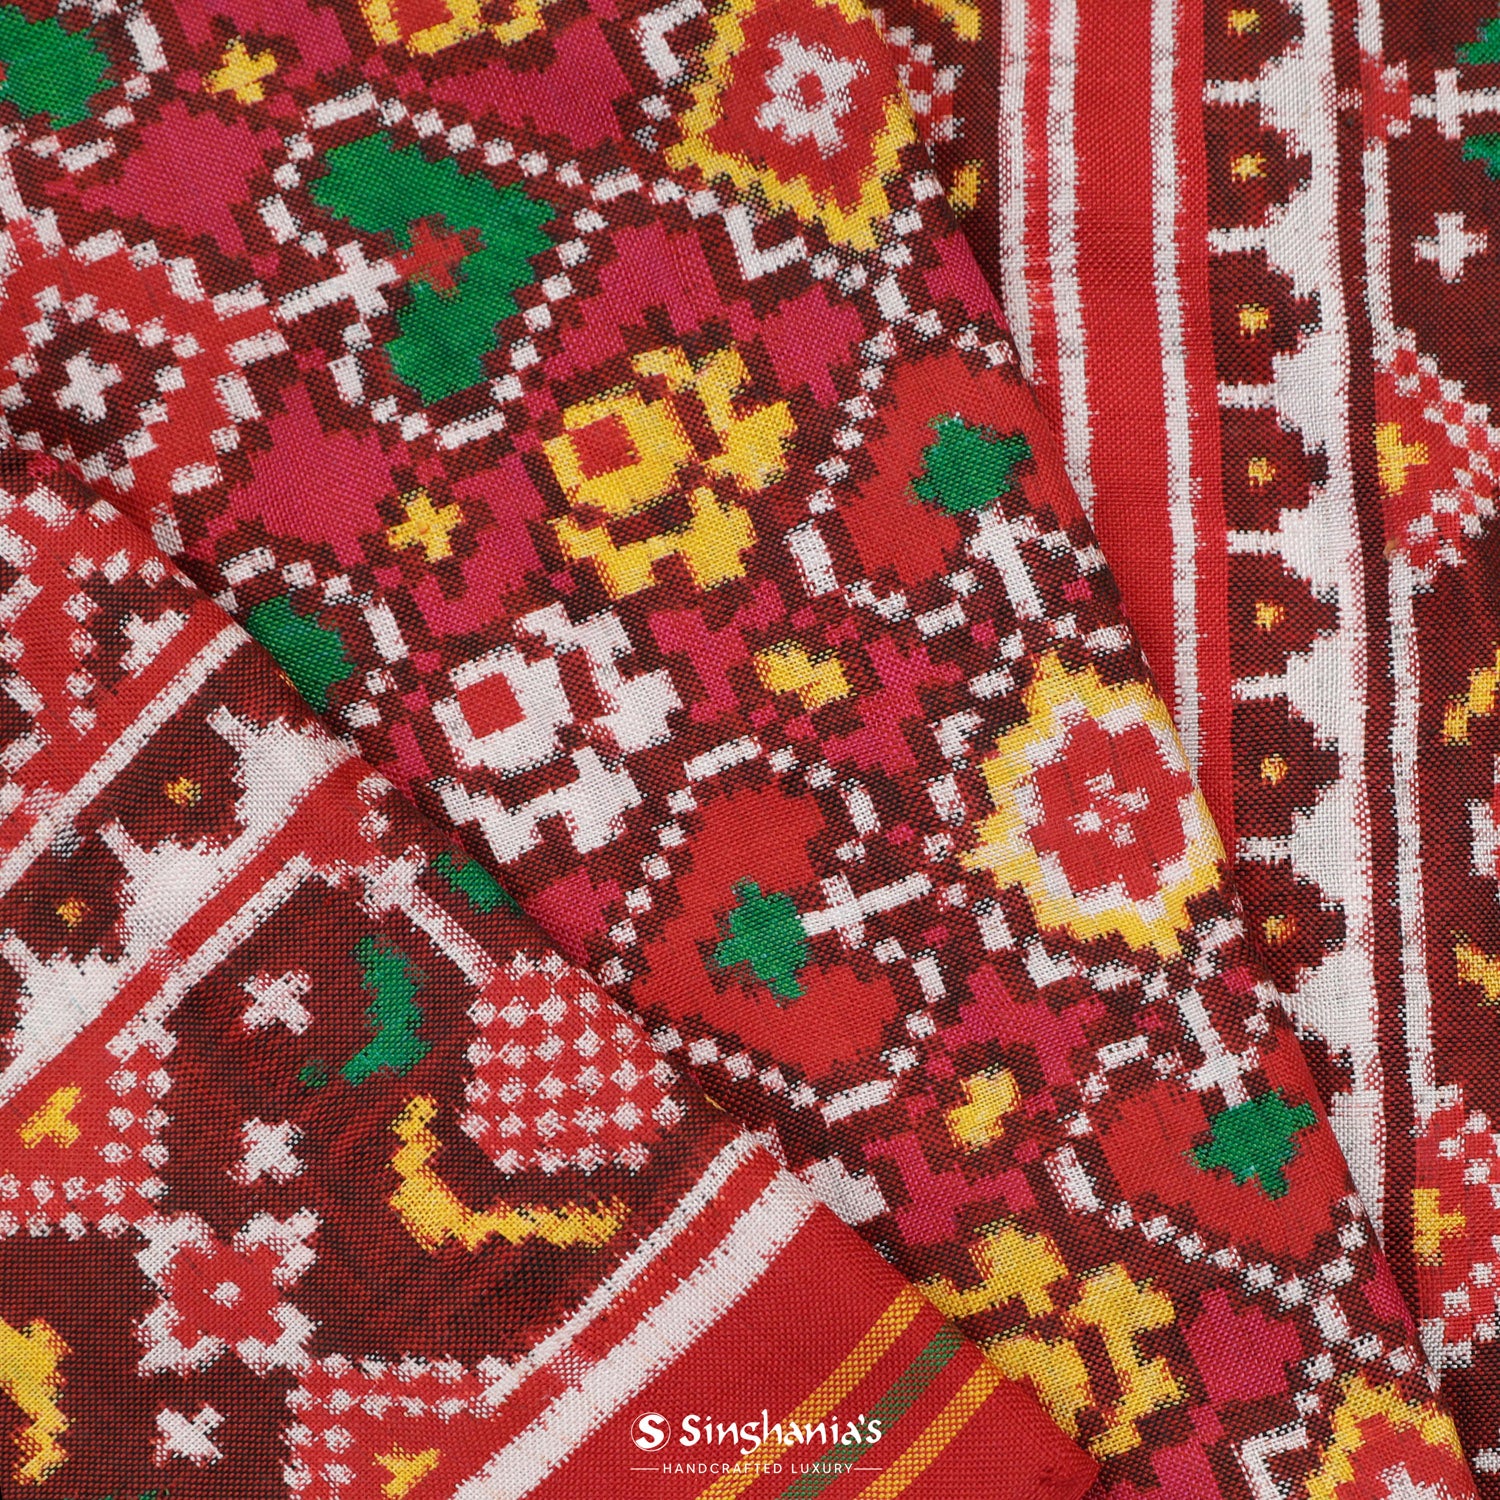 Rufous Red Patola Silk Saree With Floral Fauna Pattern